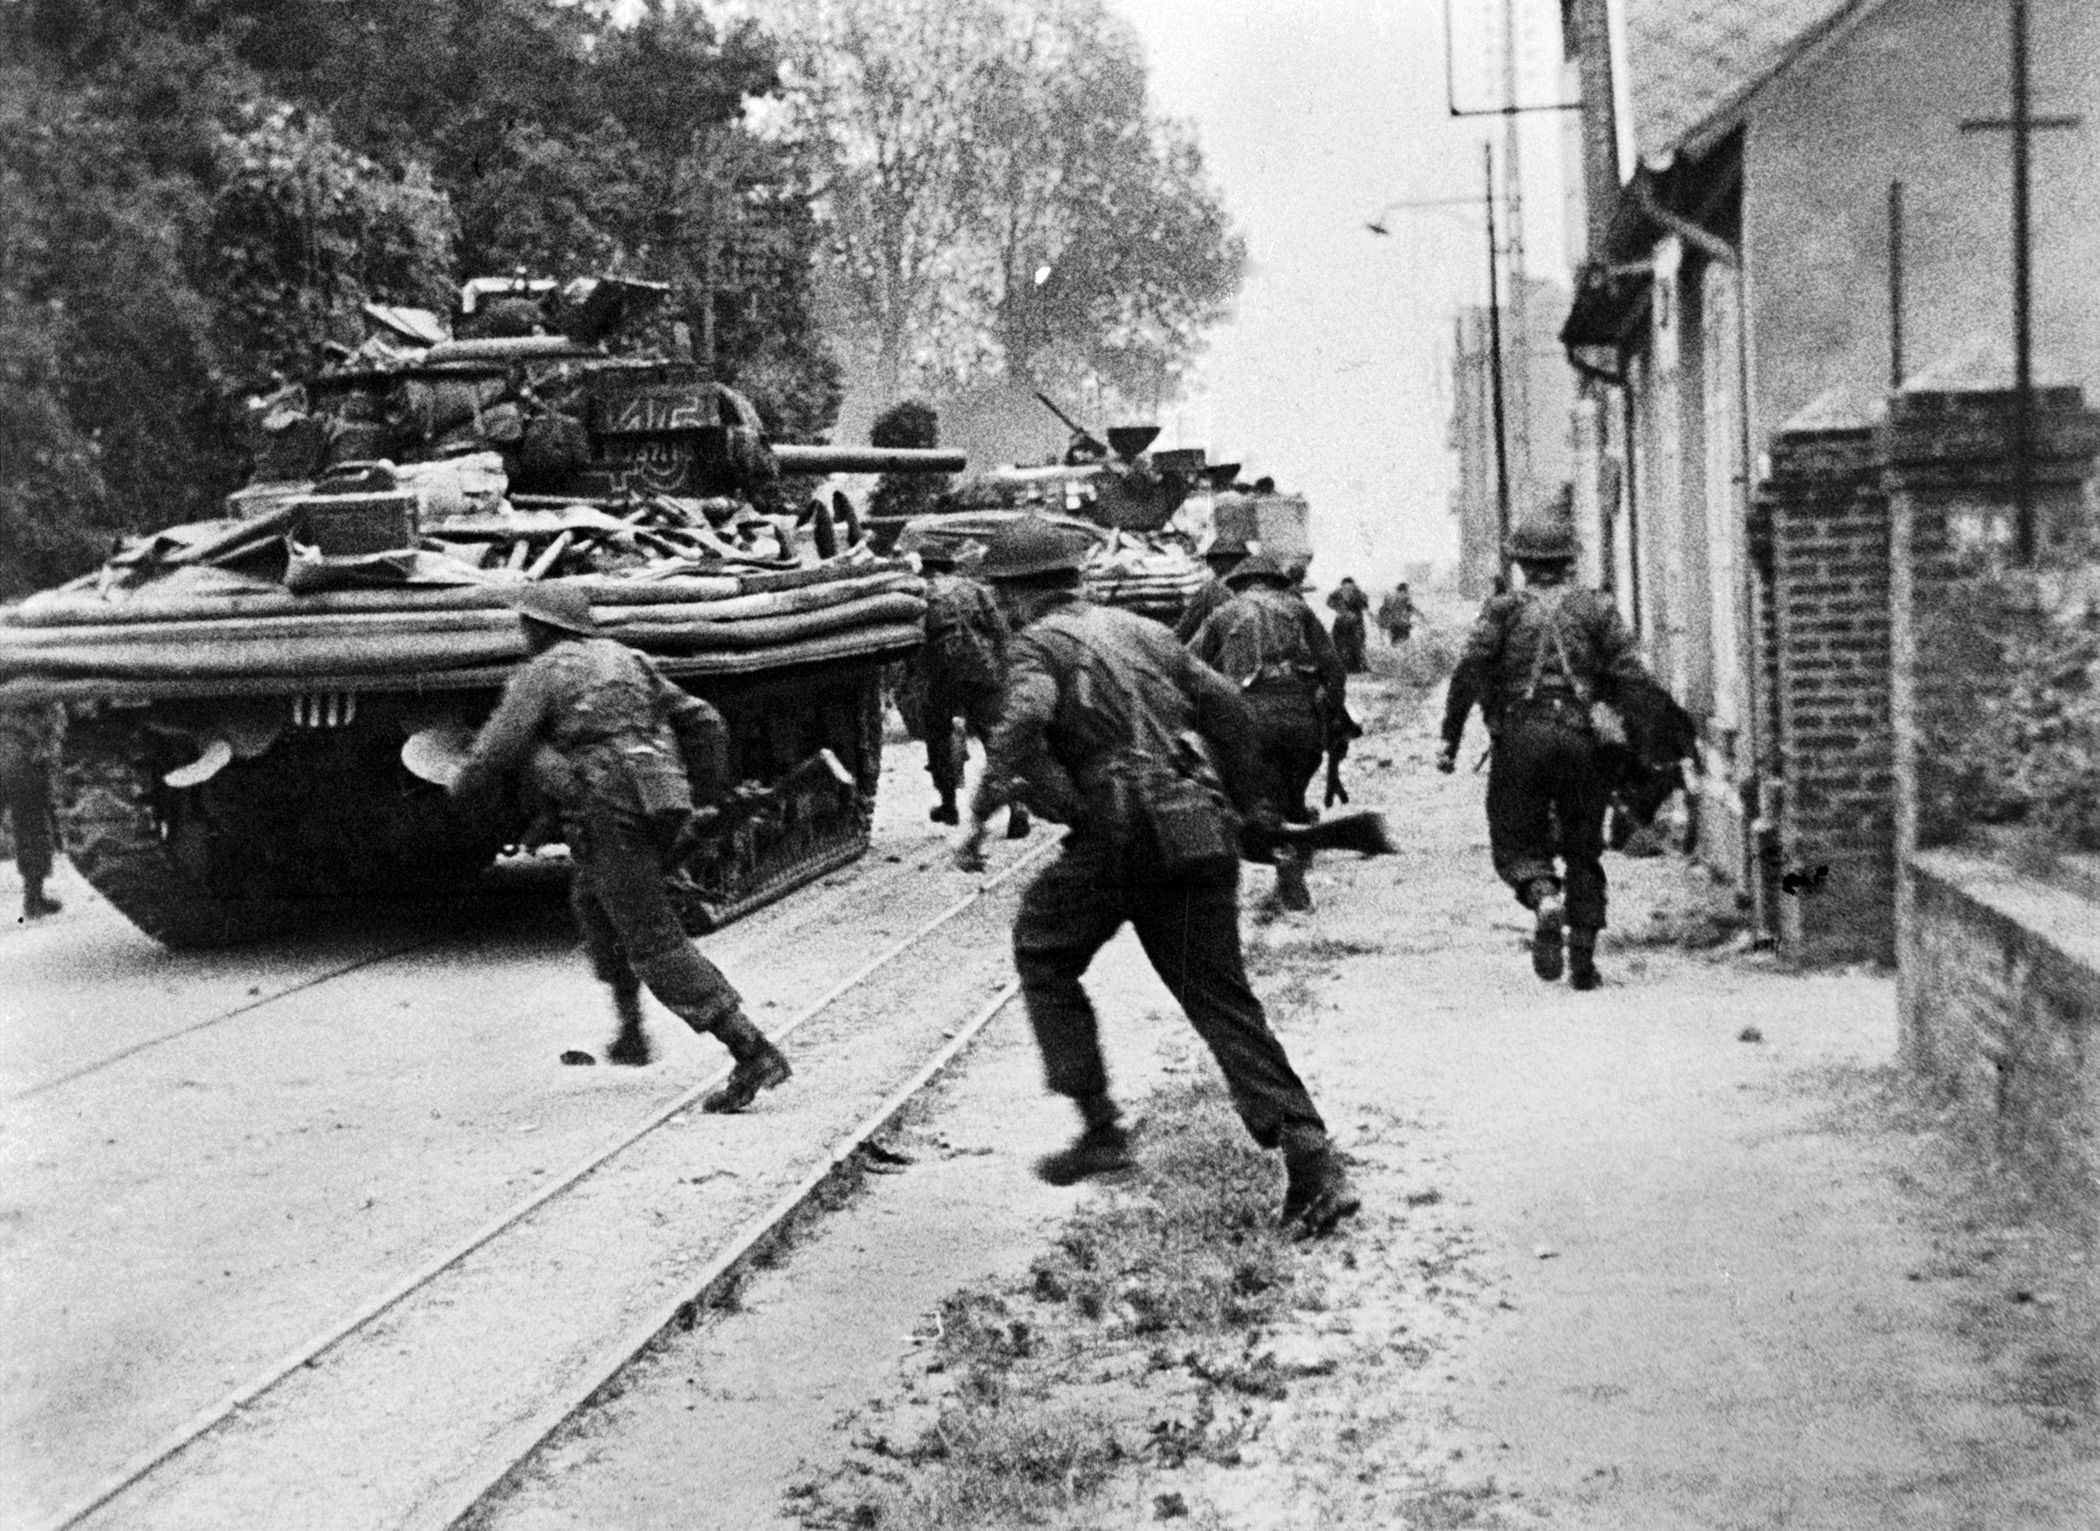 Sherman DD tanks of the 13th/18th Royal Hussars support troops of No. 4 Commando on D-Day as they advance along the Rue Riva-Bella on the outskirts of Ouistreham near Sword Beach.